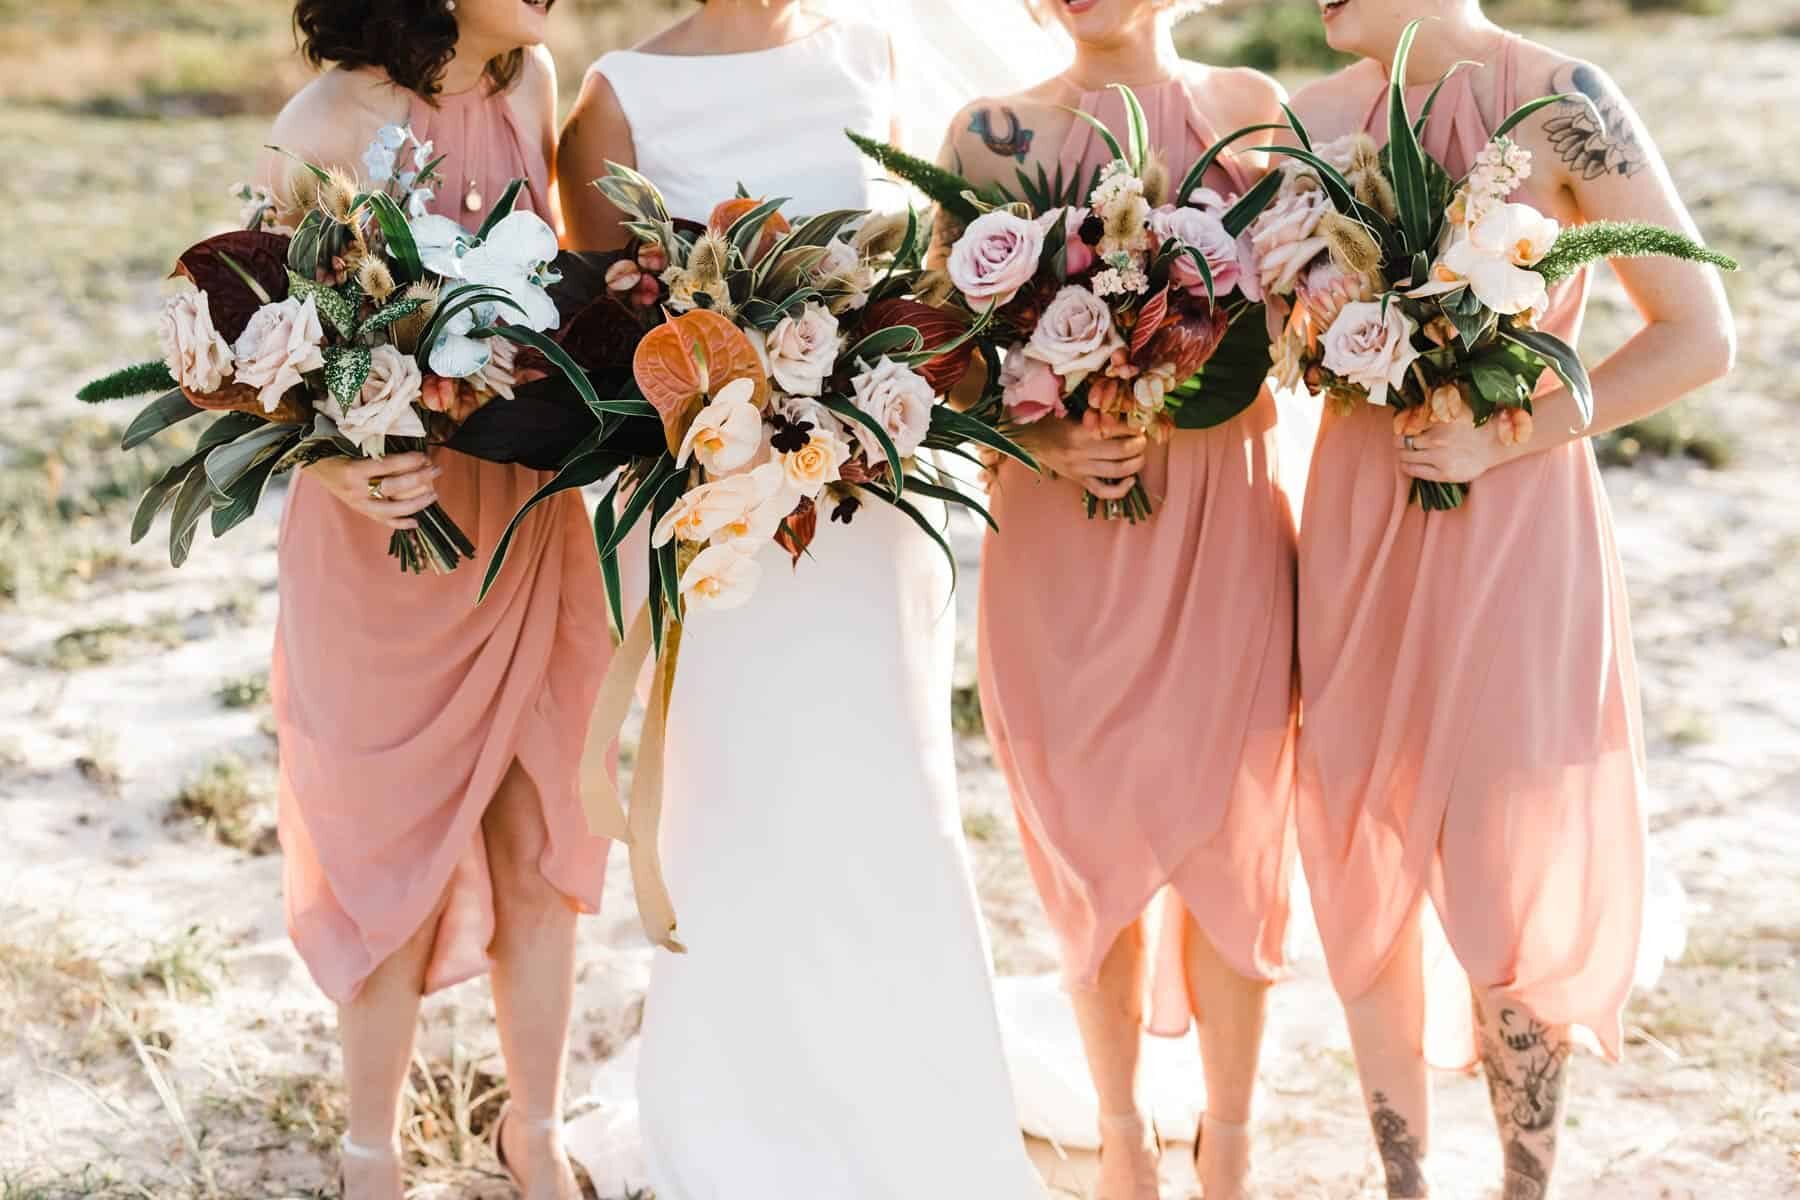 blush bridesmaid dresses and tropical bouquets